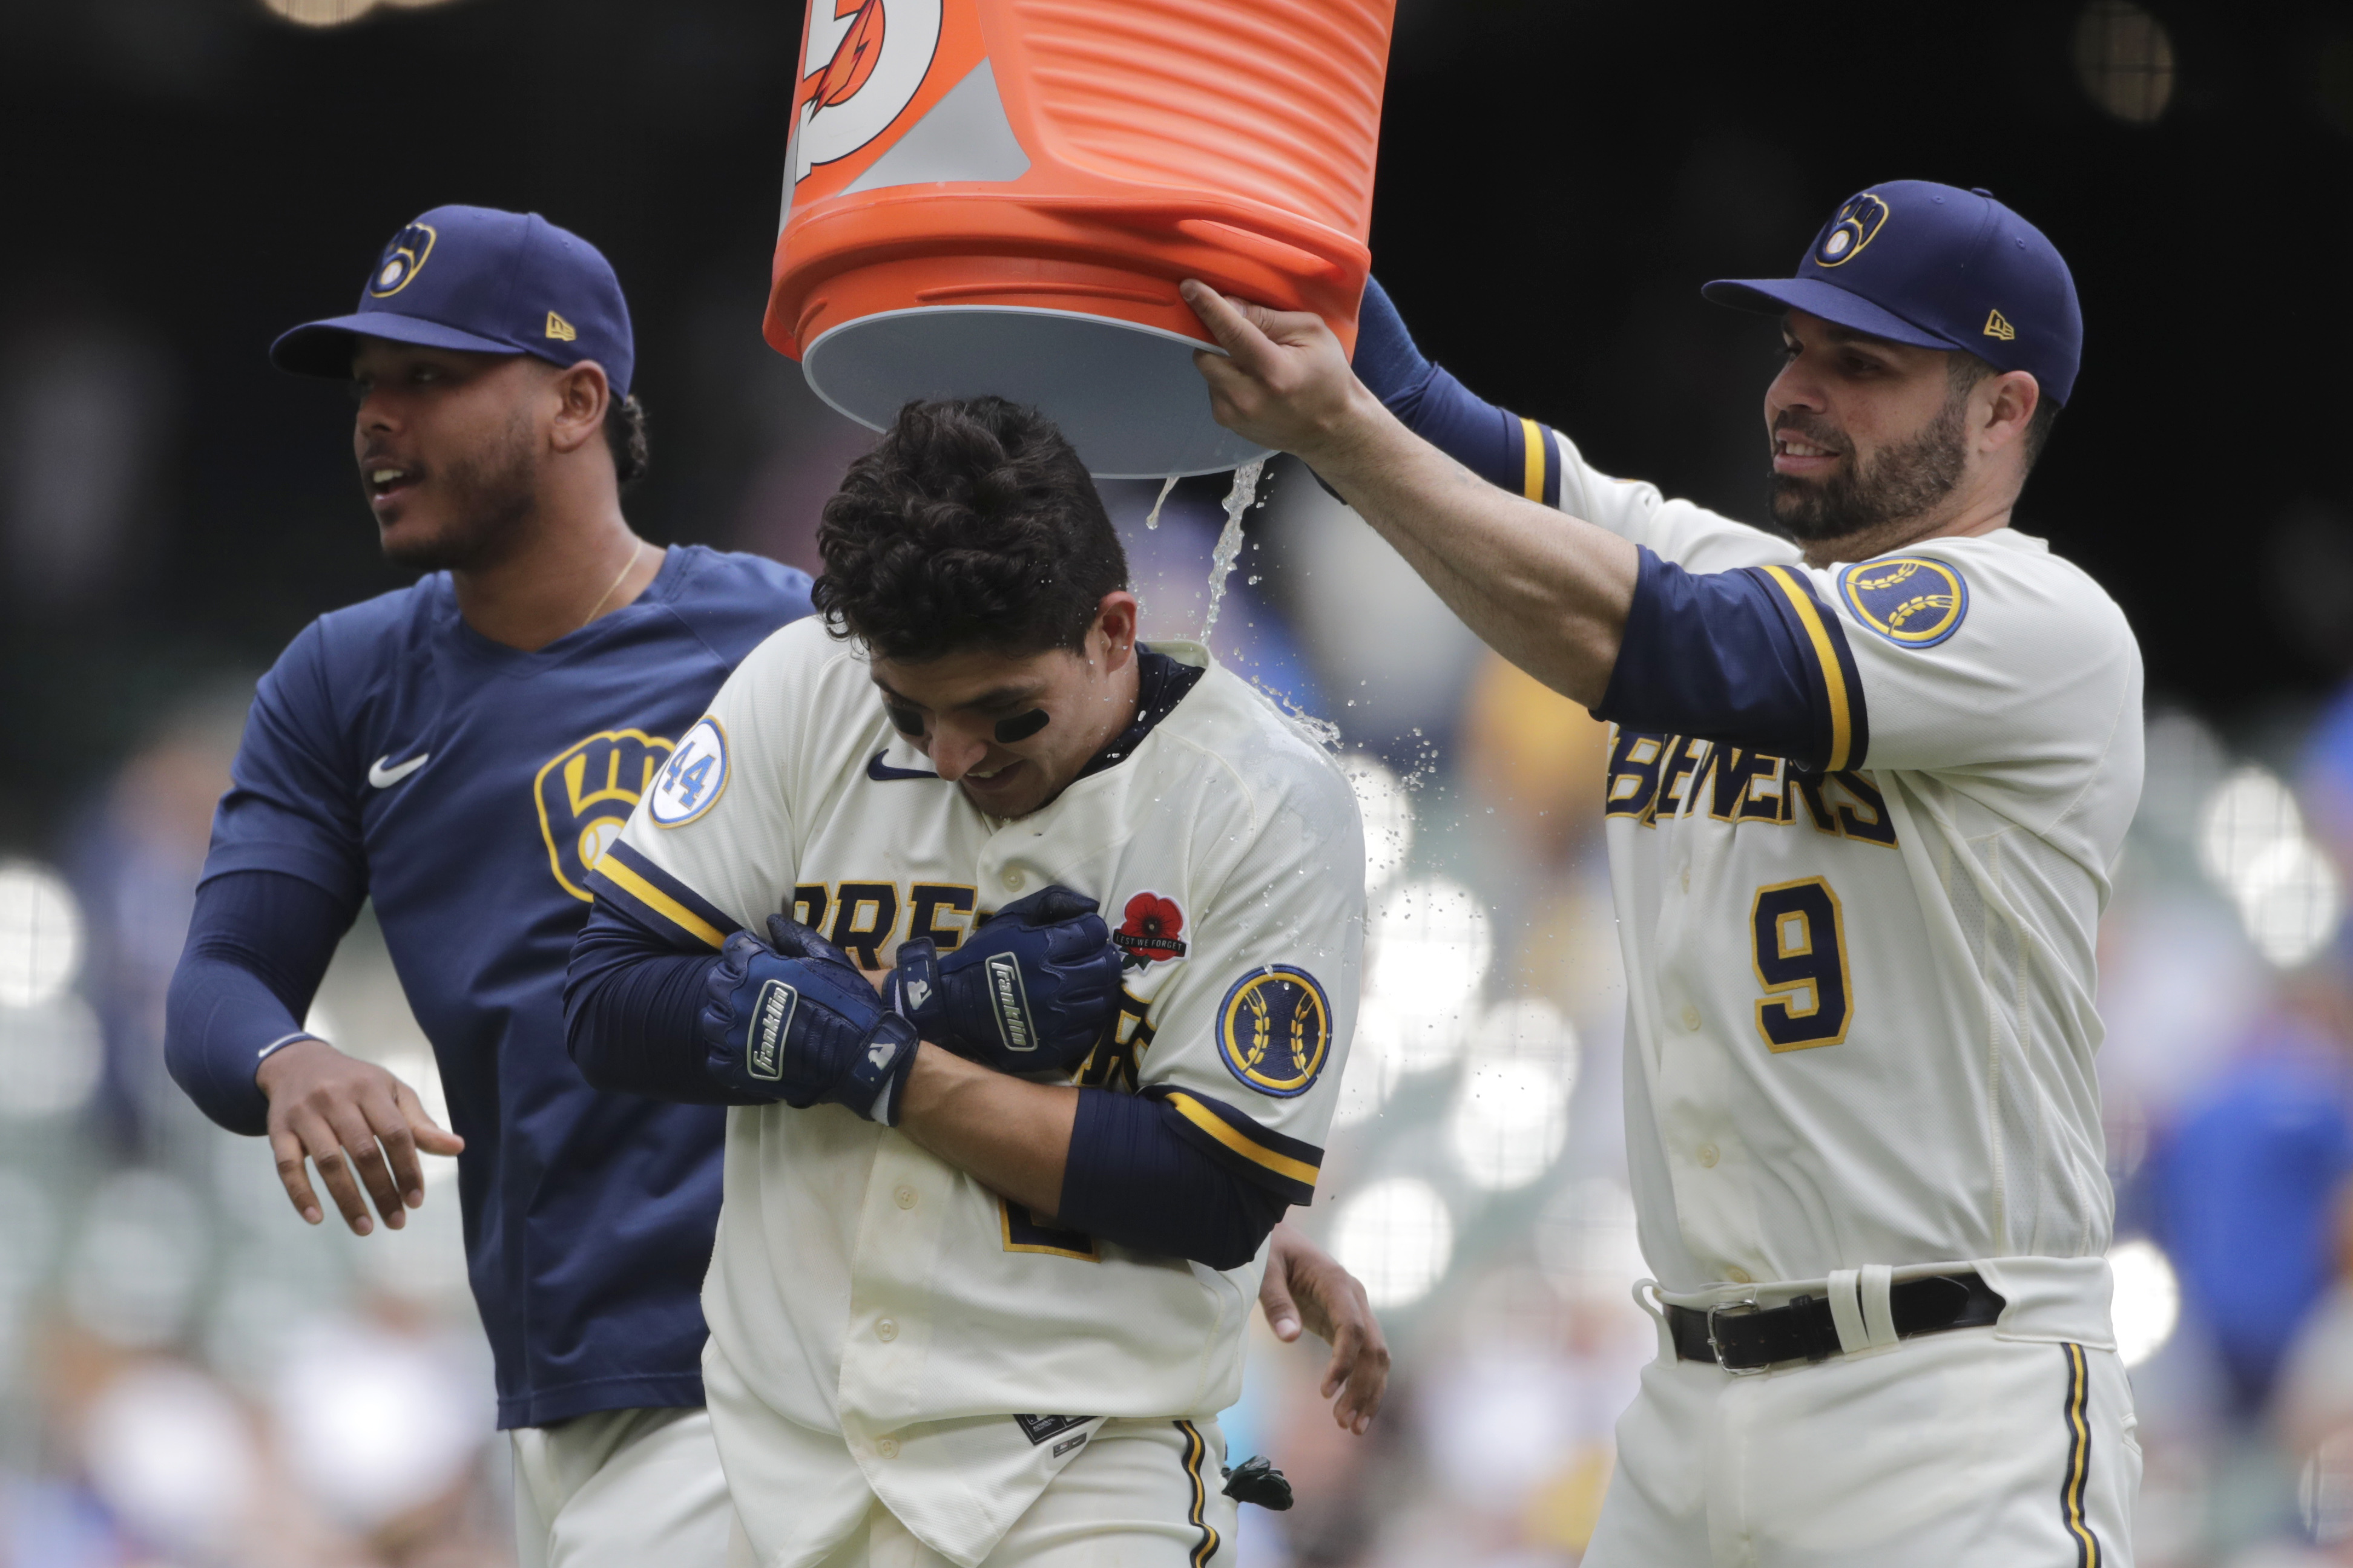 Luis Urias of the Milwaukee Brewers on the dugout step against the News  Photo - Getty Images